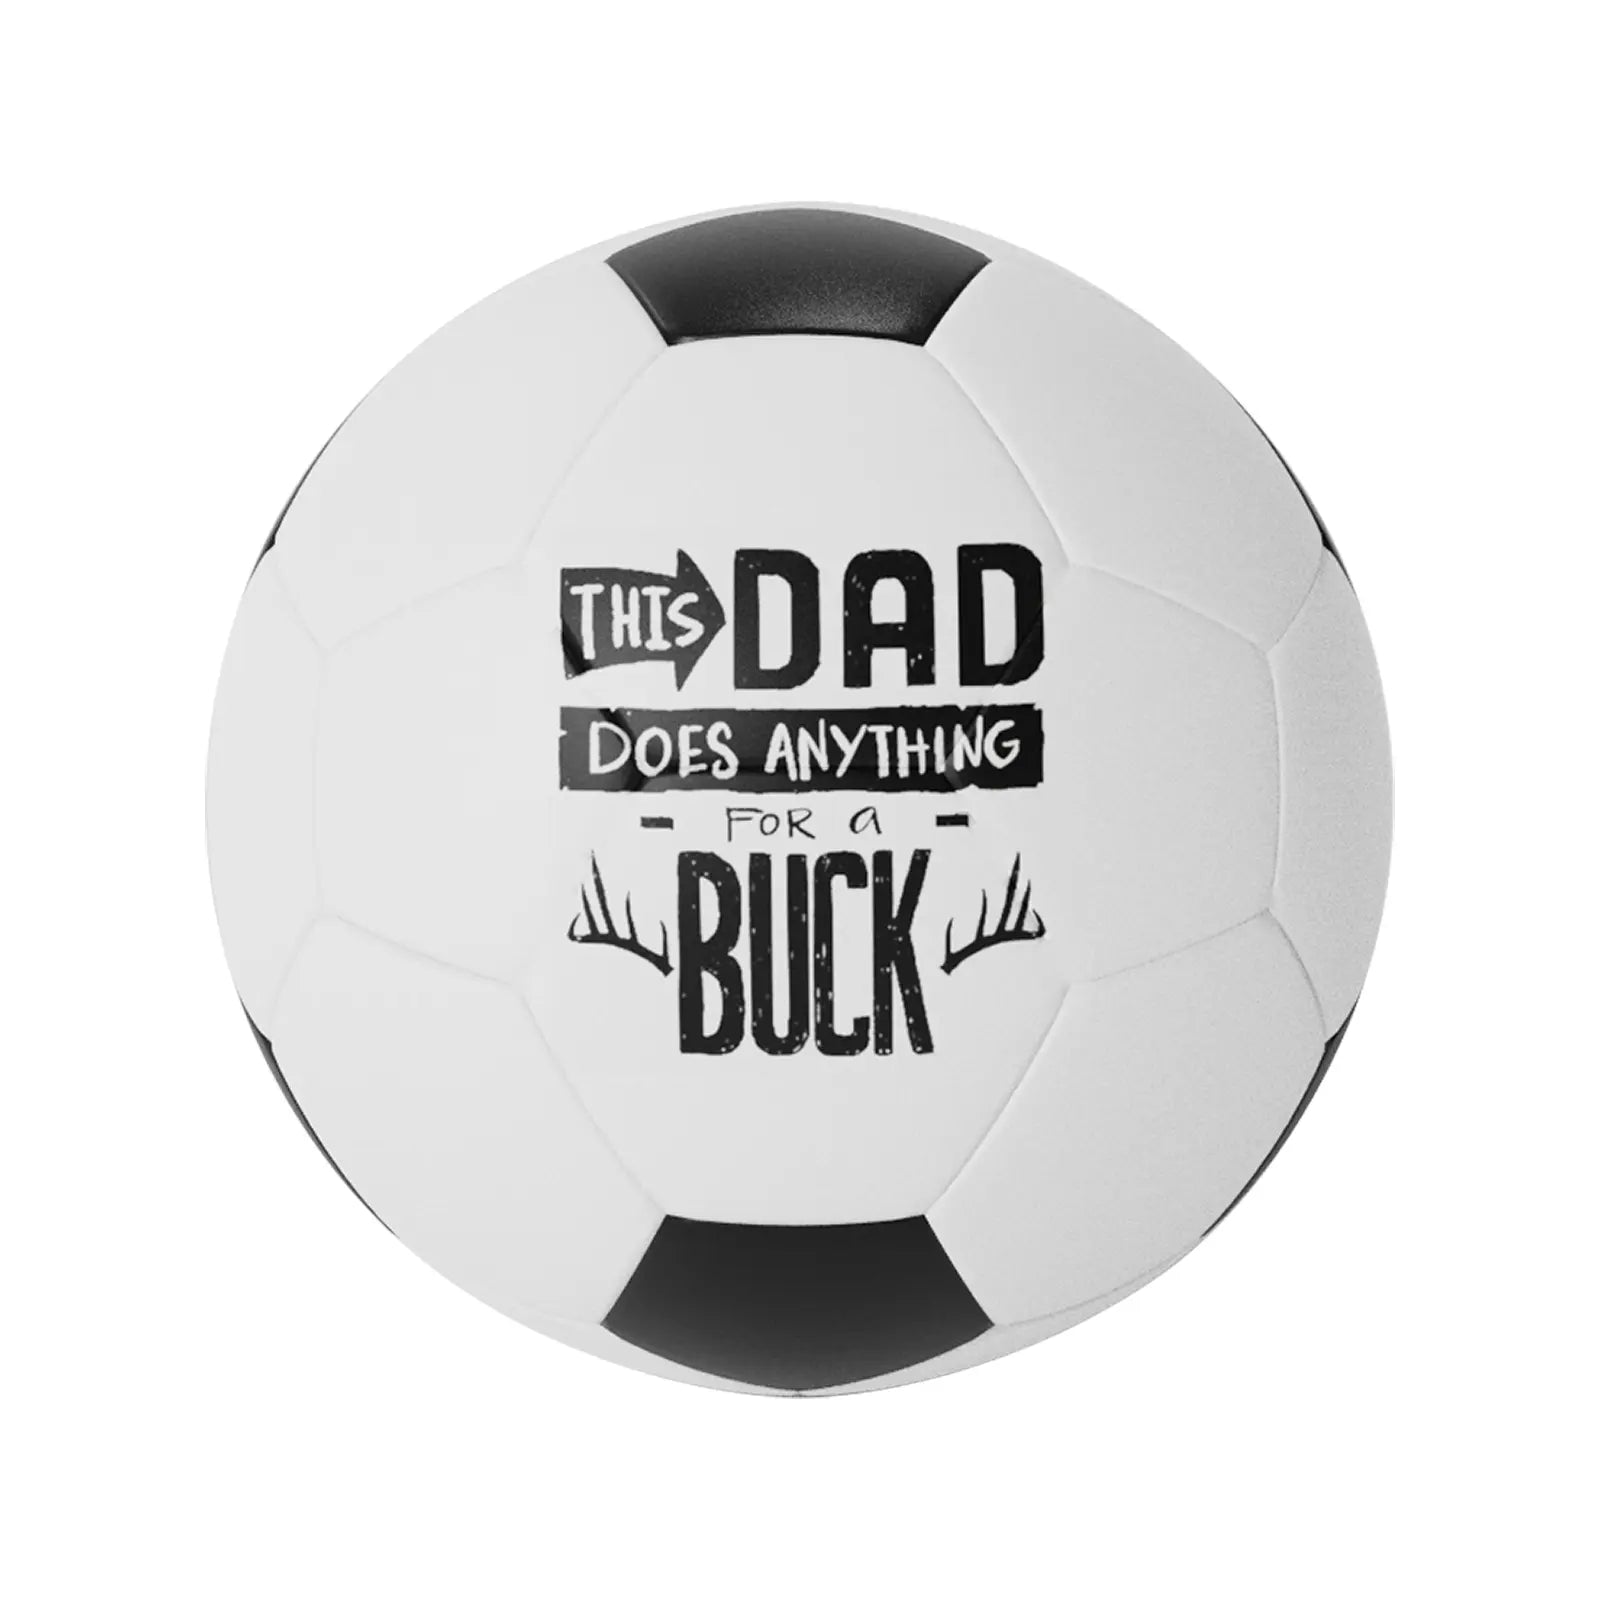 Personalized Custom Photo/Text Soccer Ball Gifts For Dad, Mom, Son, Daughter, Grandson - Family Watchs